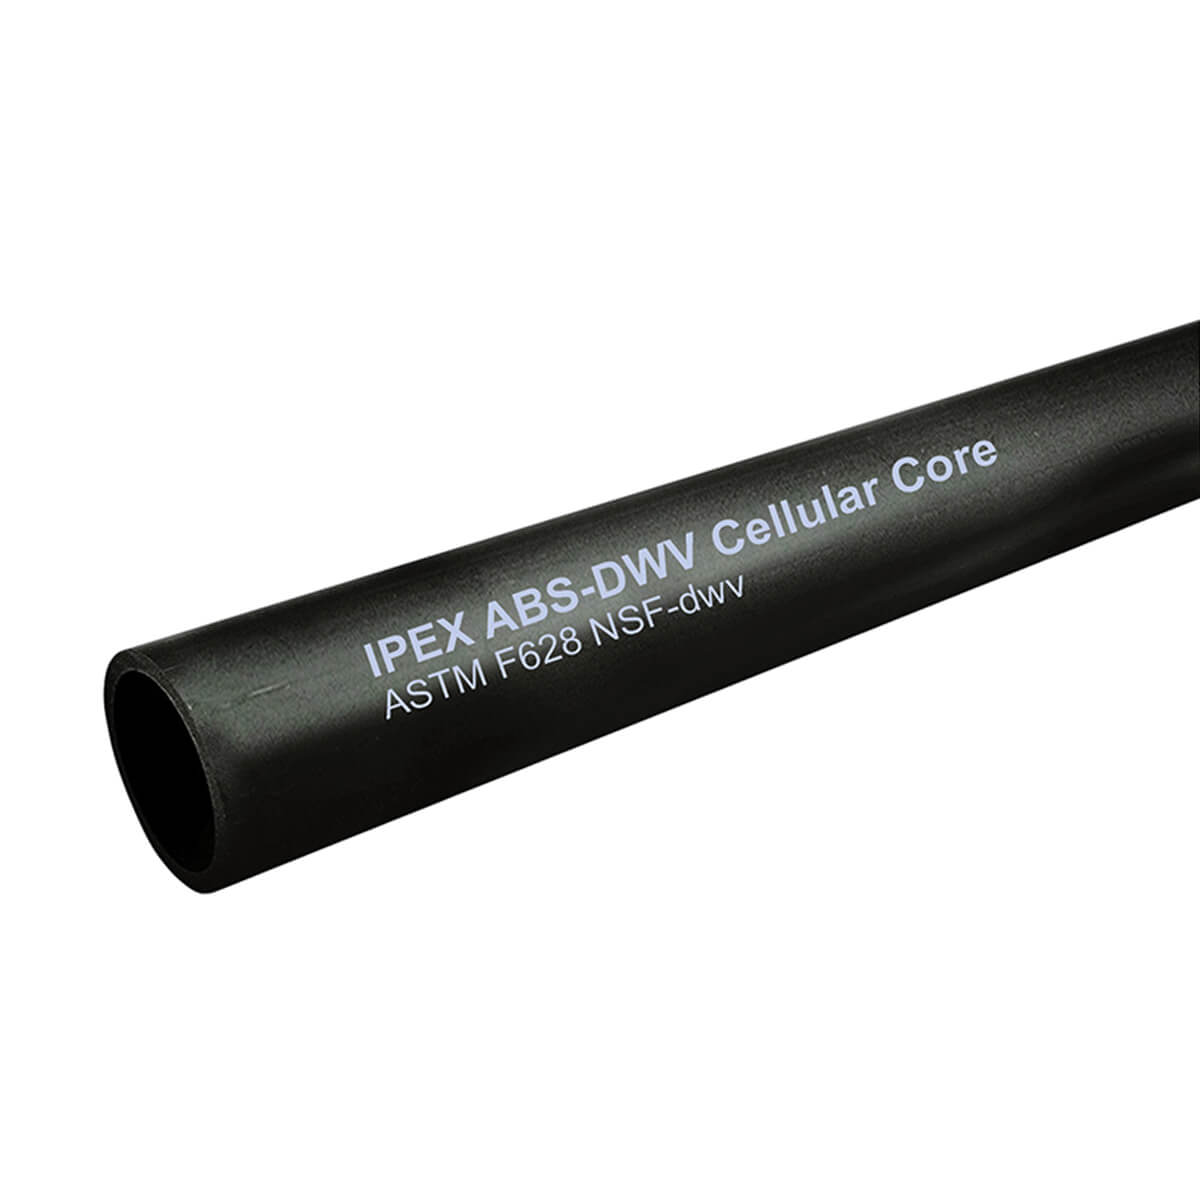 Cell Core Pipe - ABS-DWV - 1-1/2-in x 6-ft